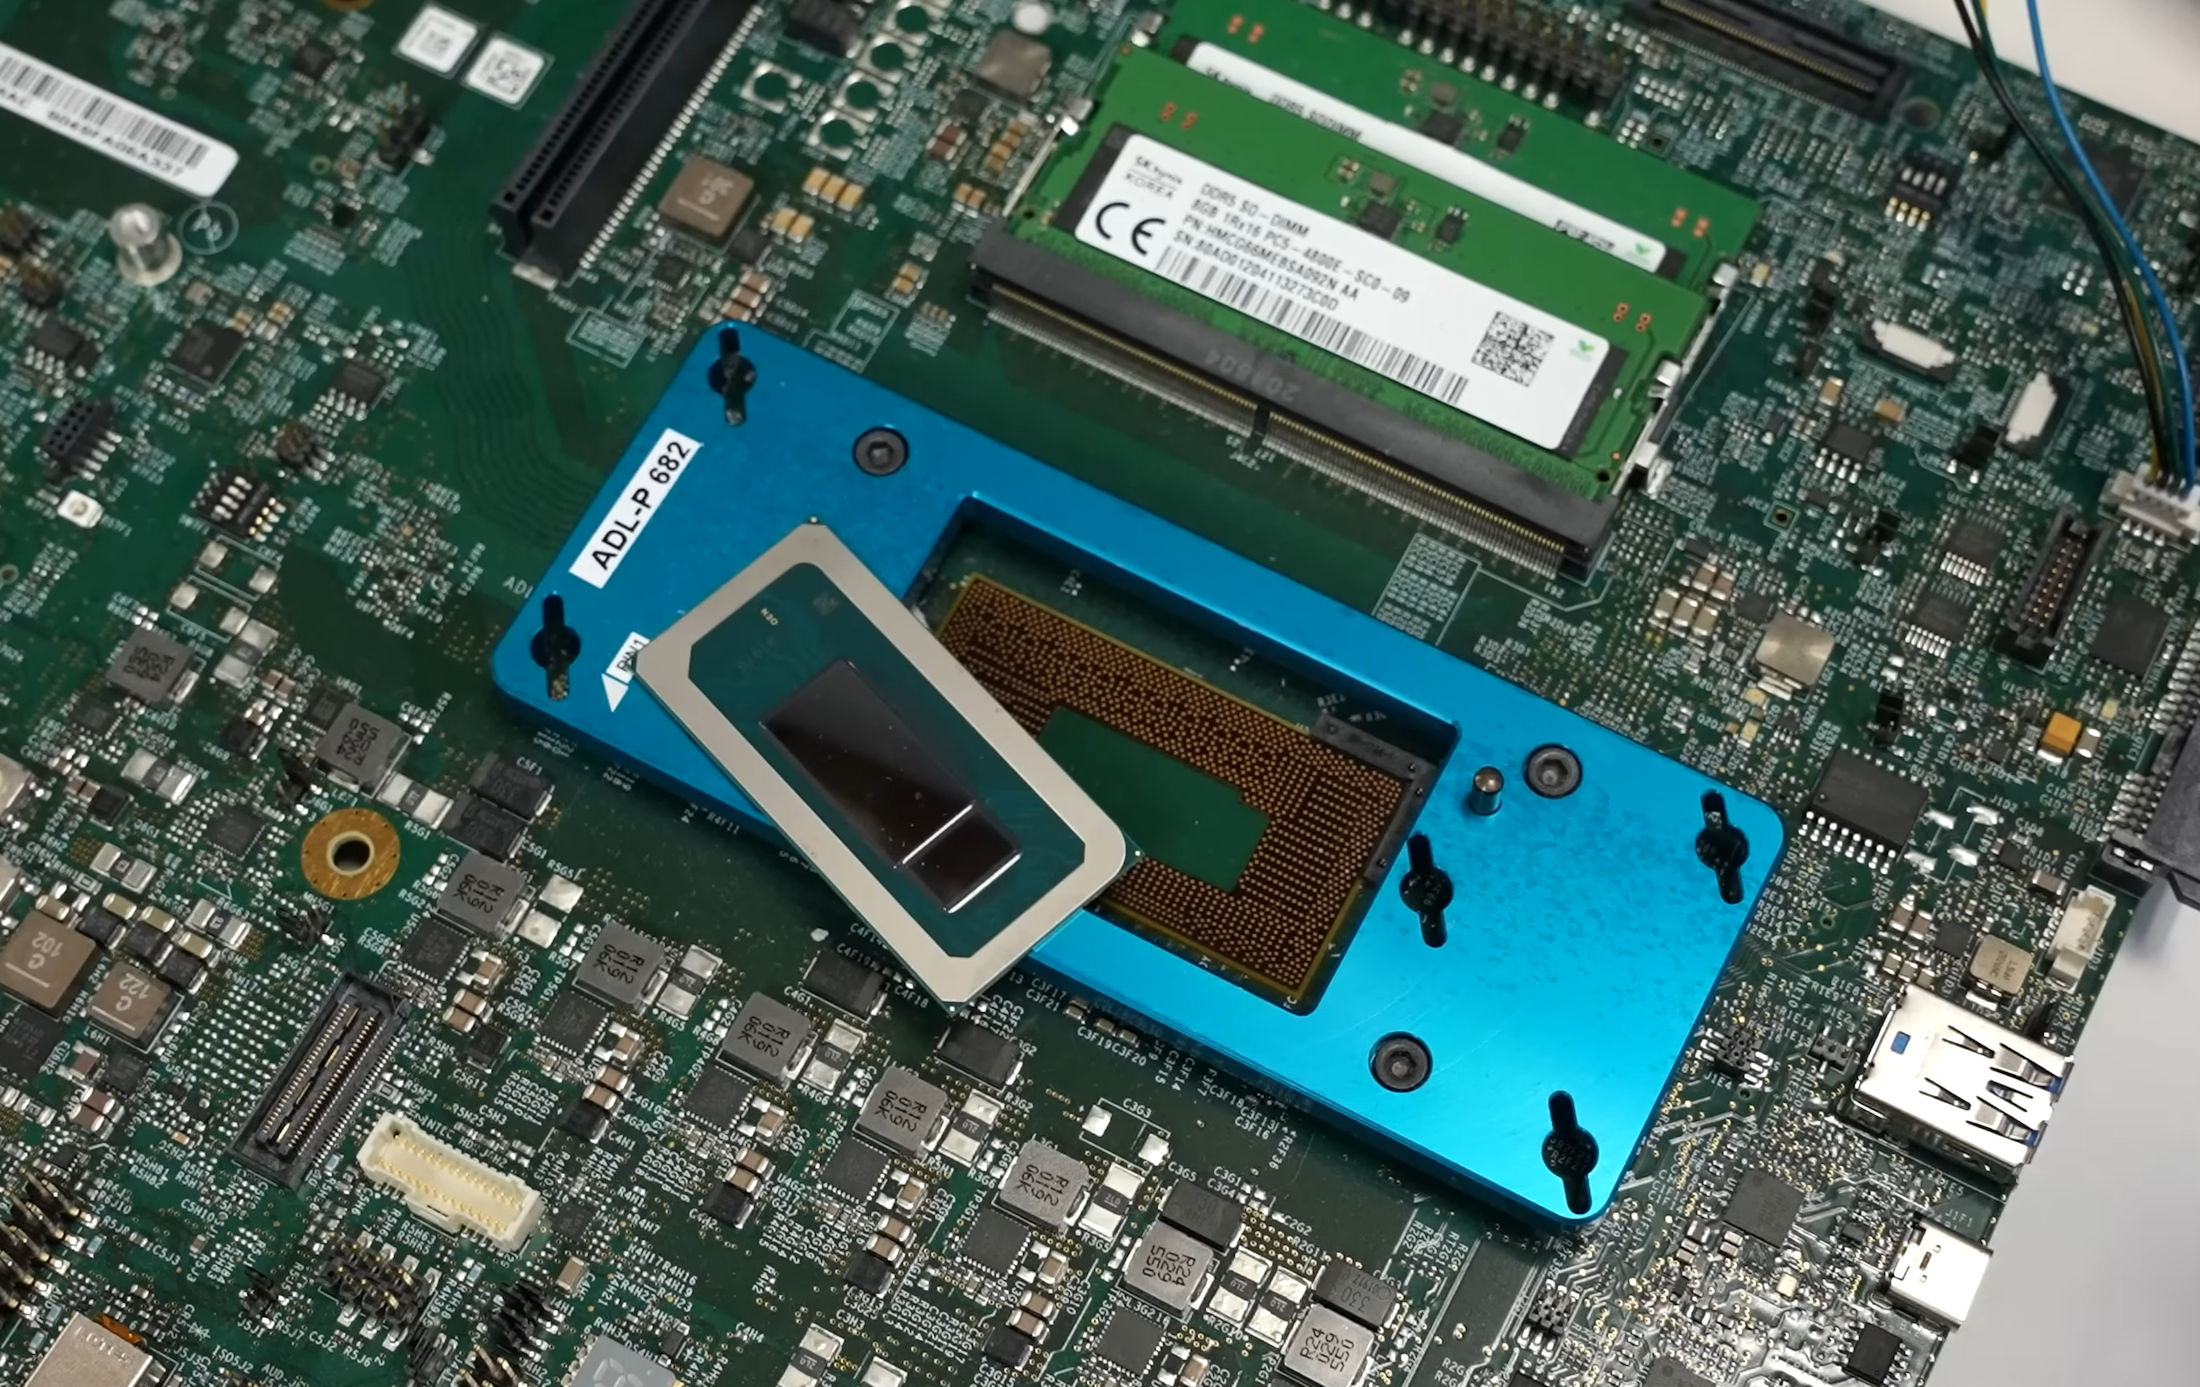 Intel first showed its “secret” ROC application for easy and fast overclocking of processors